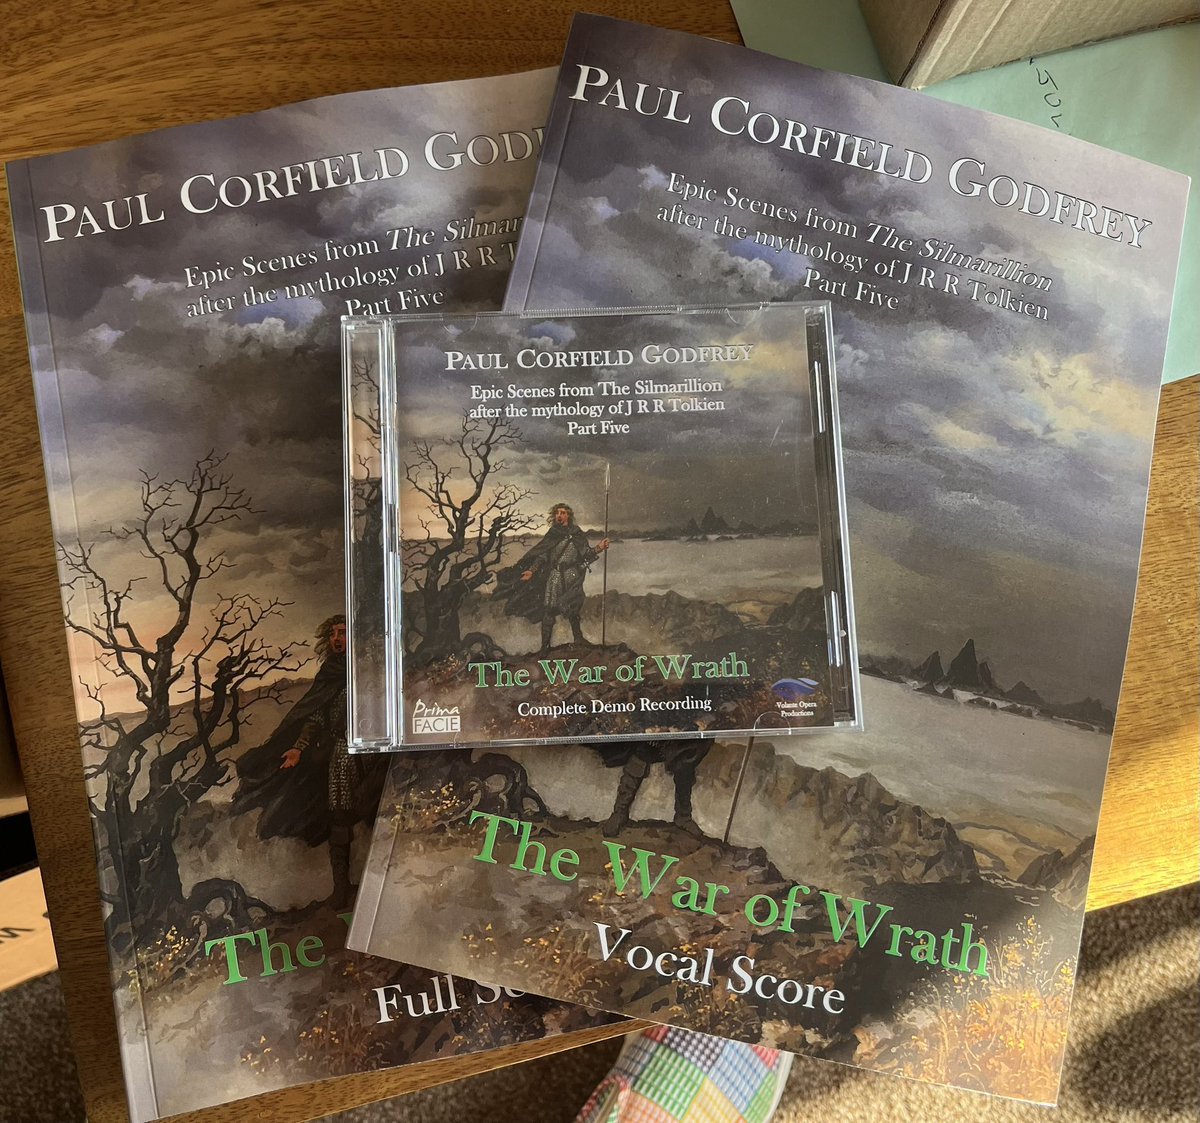 Proofs of the Vocal and Full Scores for #WarofWrath #tolkien #silmarillion #opera have arrived.

Artwork supplied by Ted Nasmith.

Available soon from paulcorfieldgodfrey.co.uk 

#shelfie #shelfies #classicalmusic #britishmusic #composersofinstagram #operatic